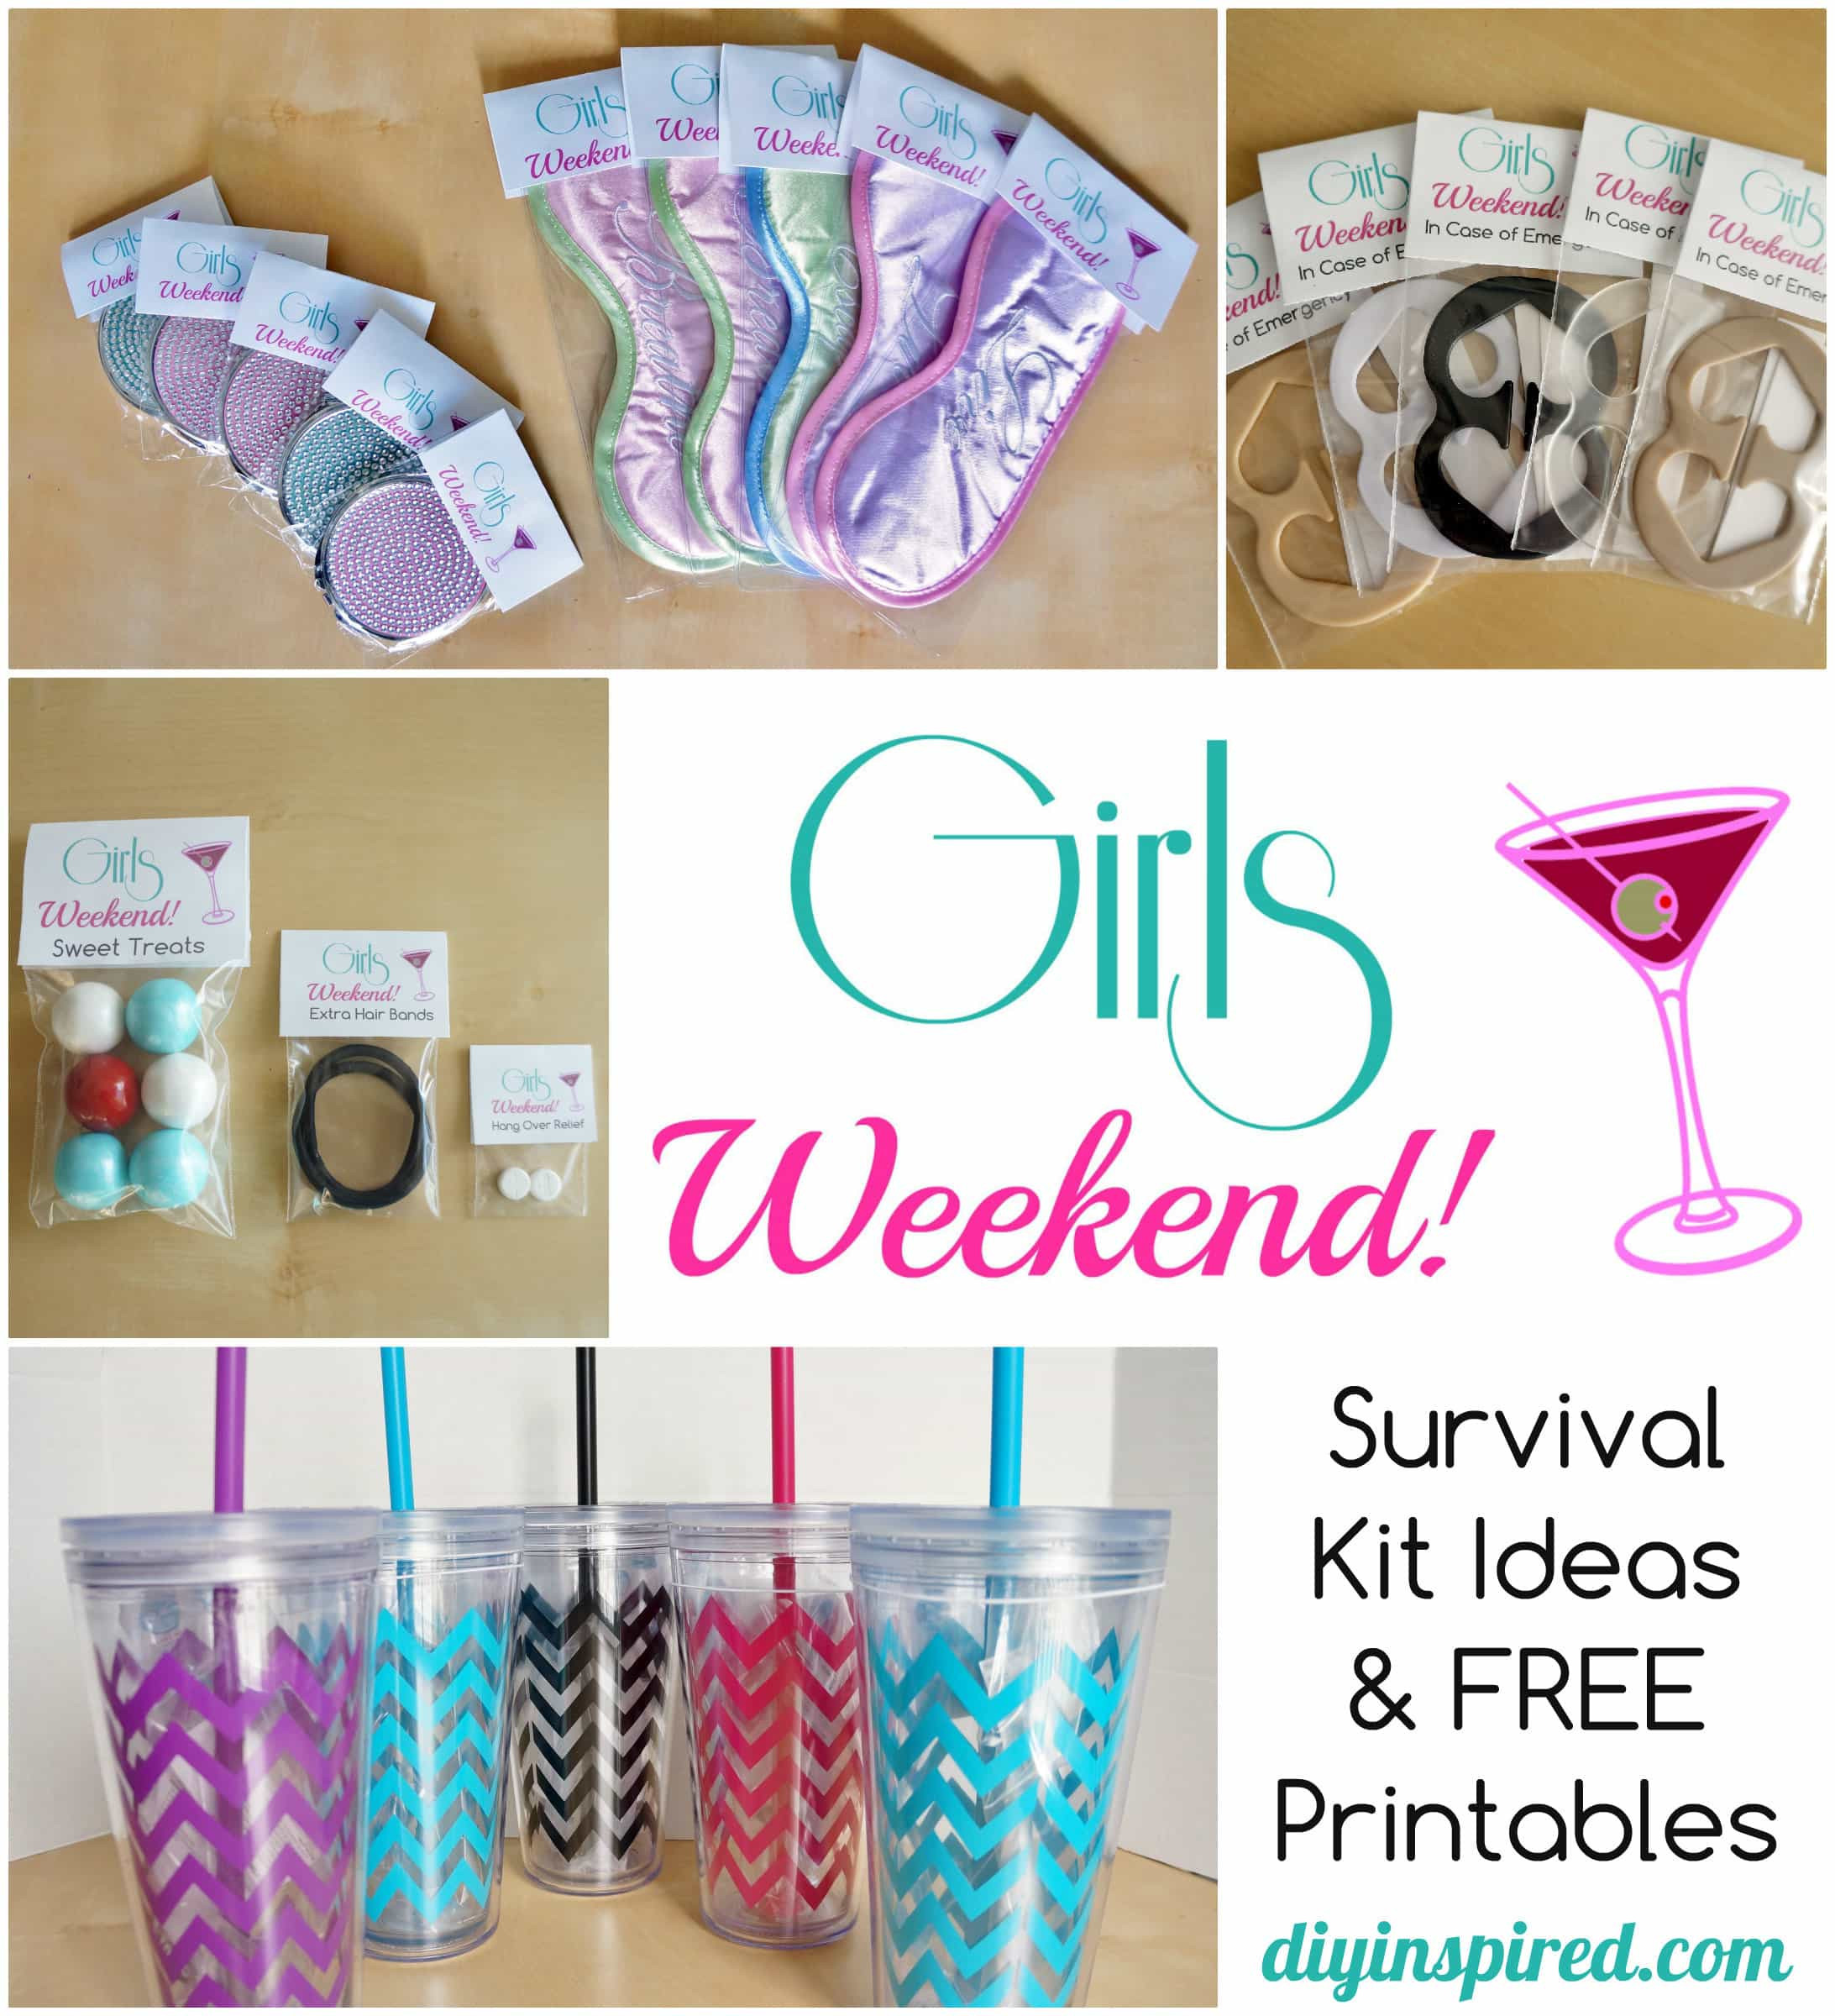 Girls Trip Gift Ideas
 The 24 Best Ideas for Girls Trip Gift Ideas Home Family